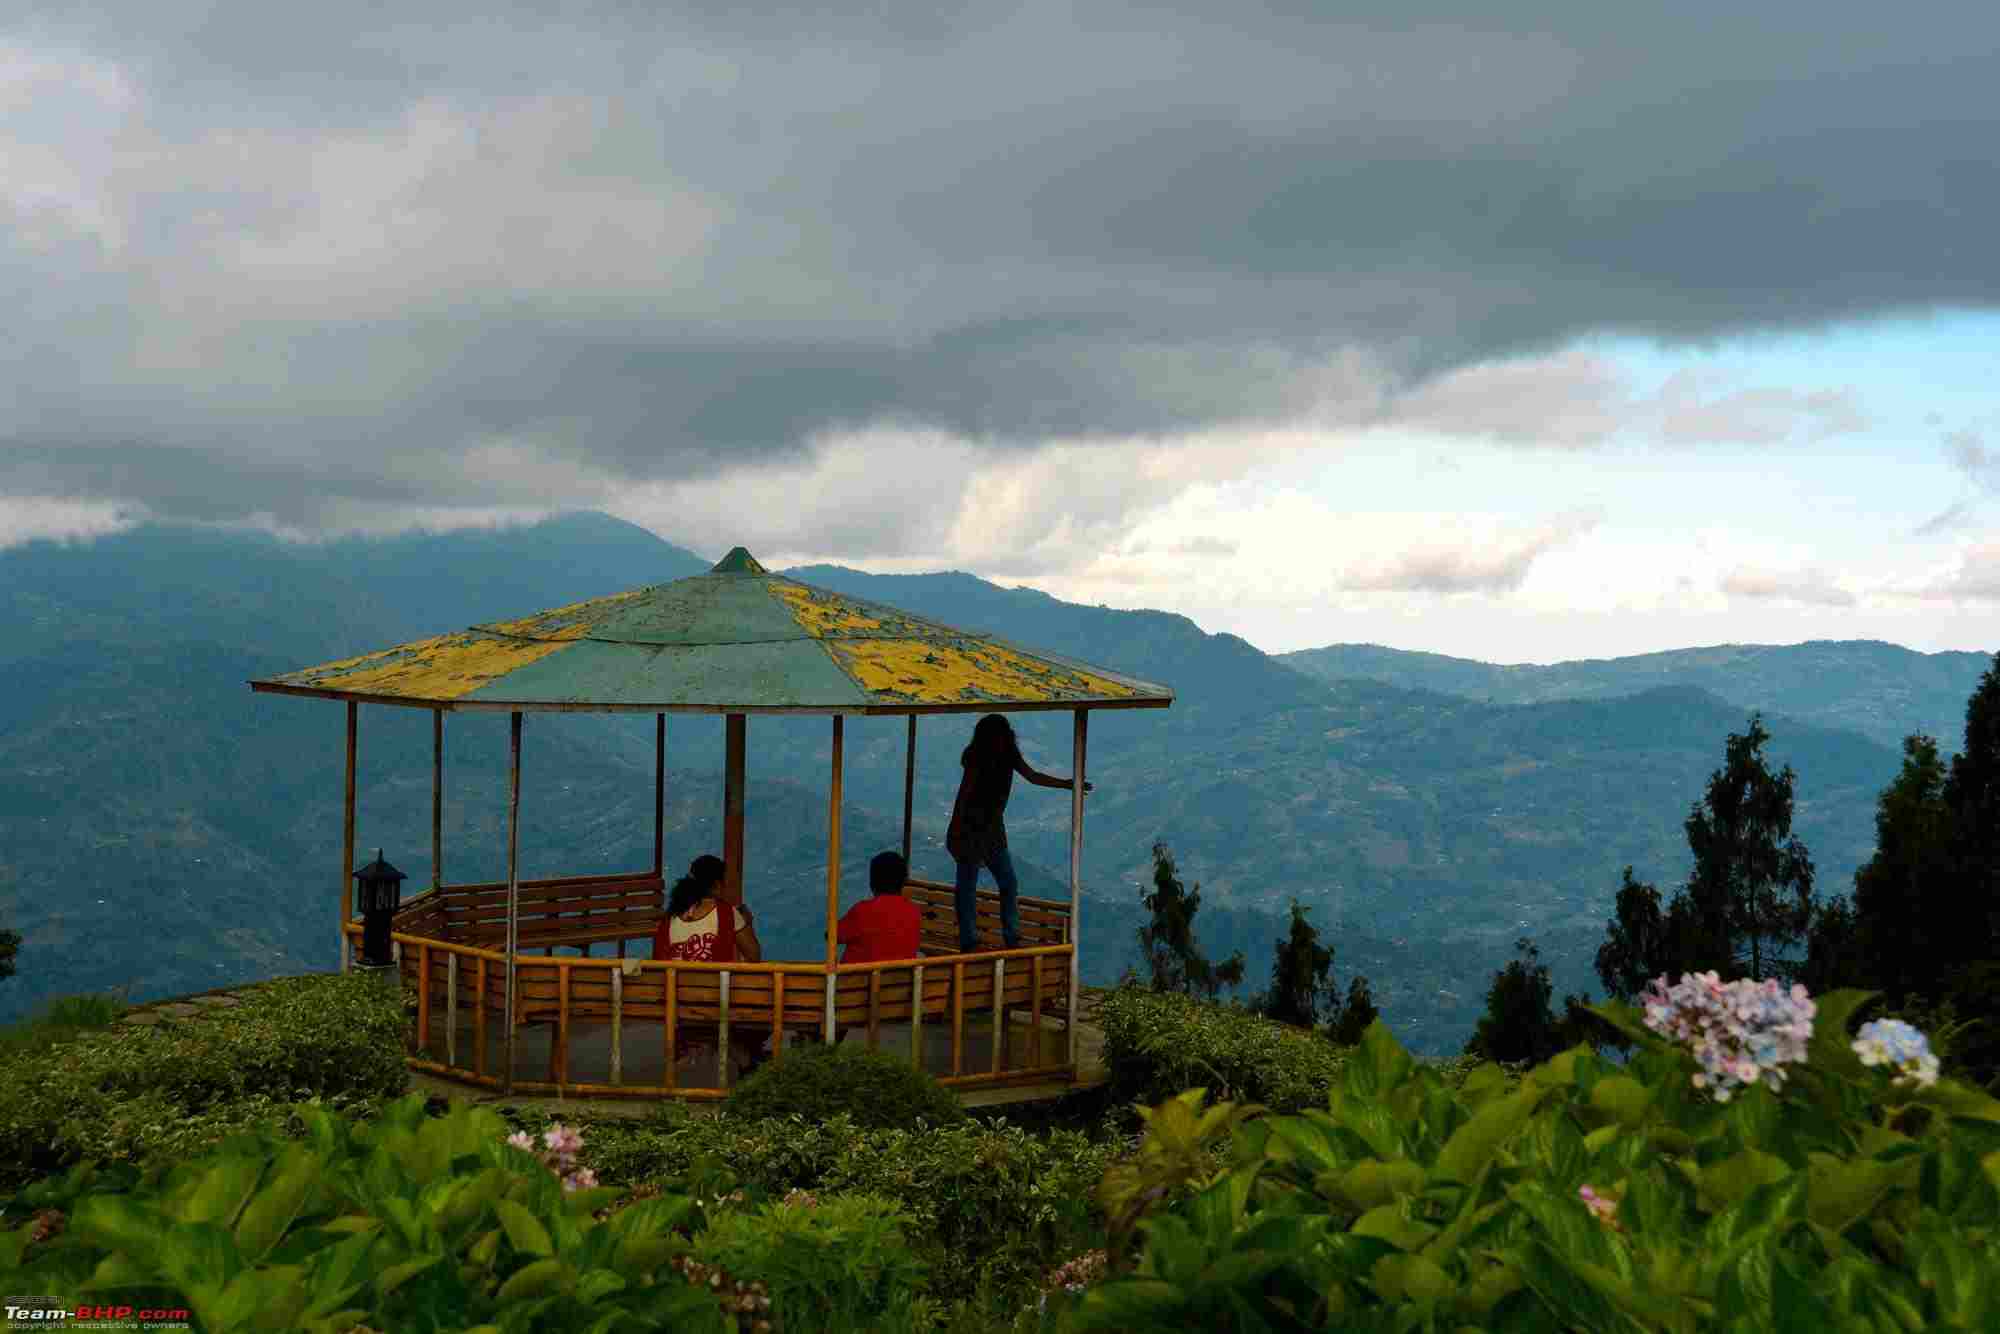 Deolo Hill" is the highest viewpoint in Kalimpong